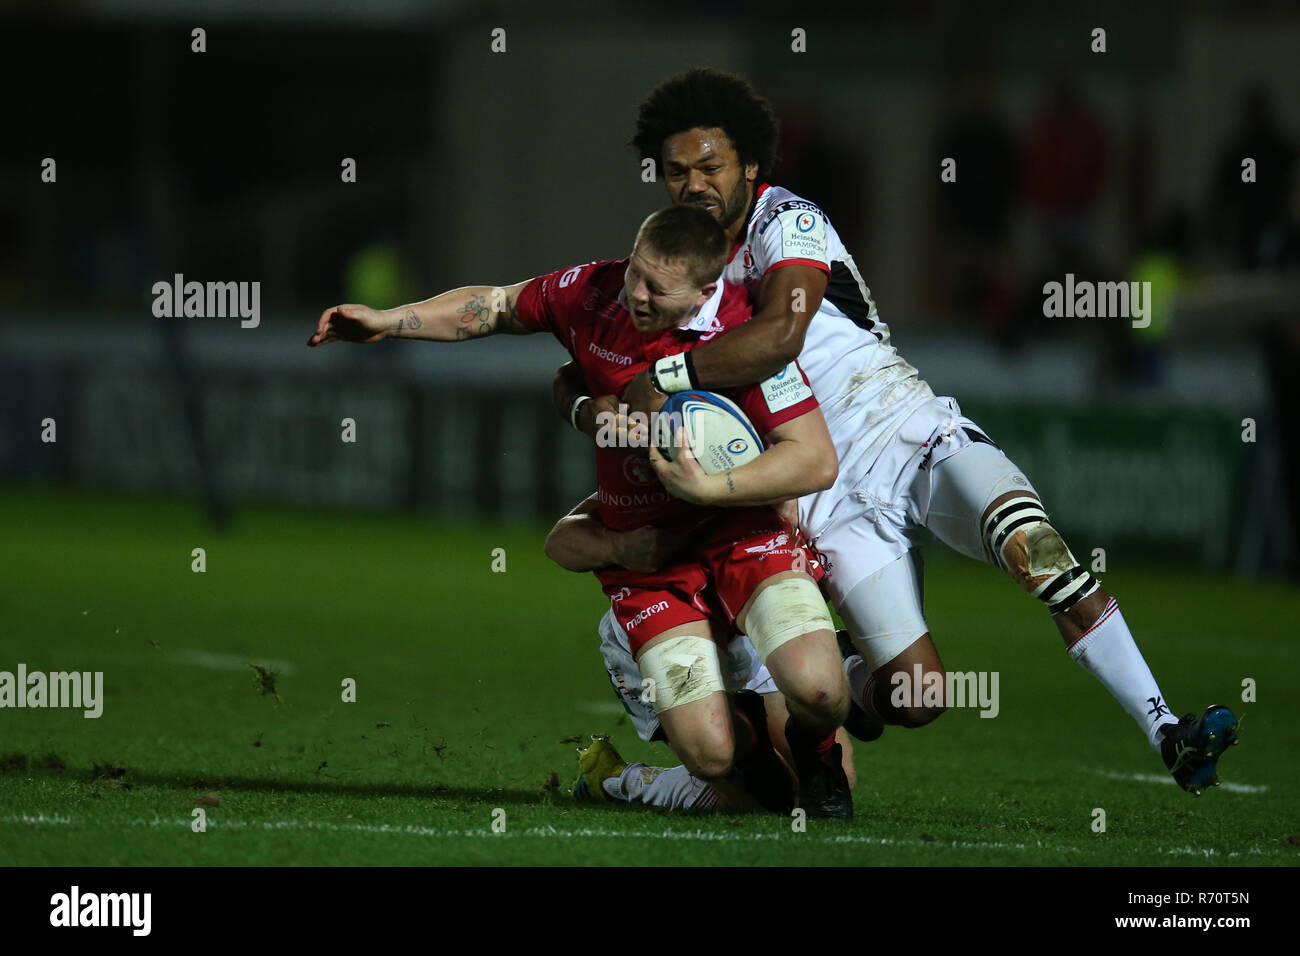 James Davies of the Scarlets is  tackled by Ulster's  Henry Speight ® . Scarlets v Ulster rugby, Heineken European Champions Cup, pool 4 match at Parc y Scarlets in Llanelli, South Wales on Friday 7th December 2018.  picture by Andrew Orchard/Andrew Orchard sports photography/Alamy Live News Stock Photo